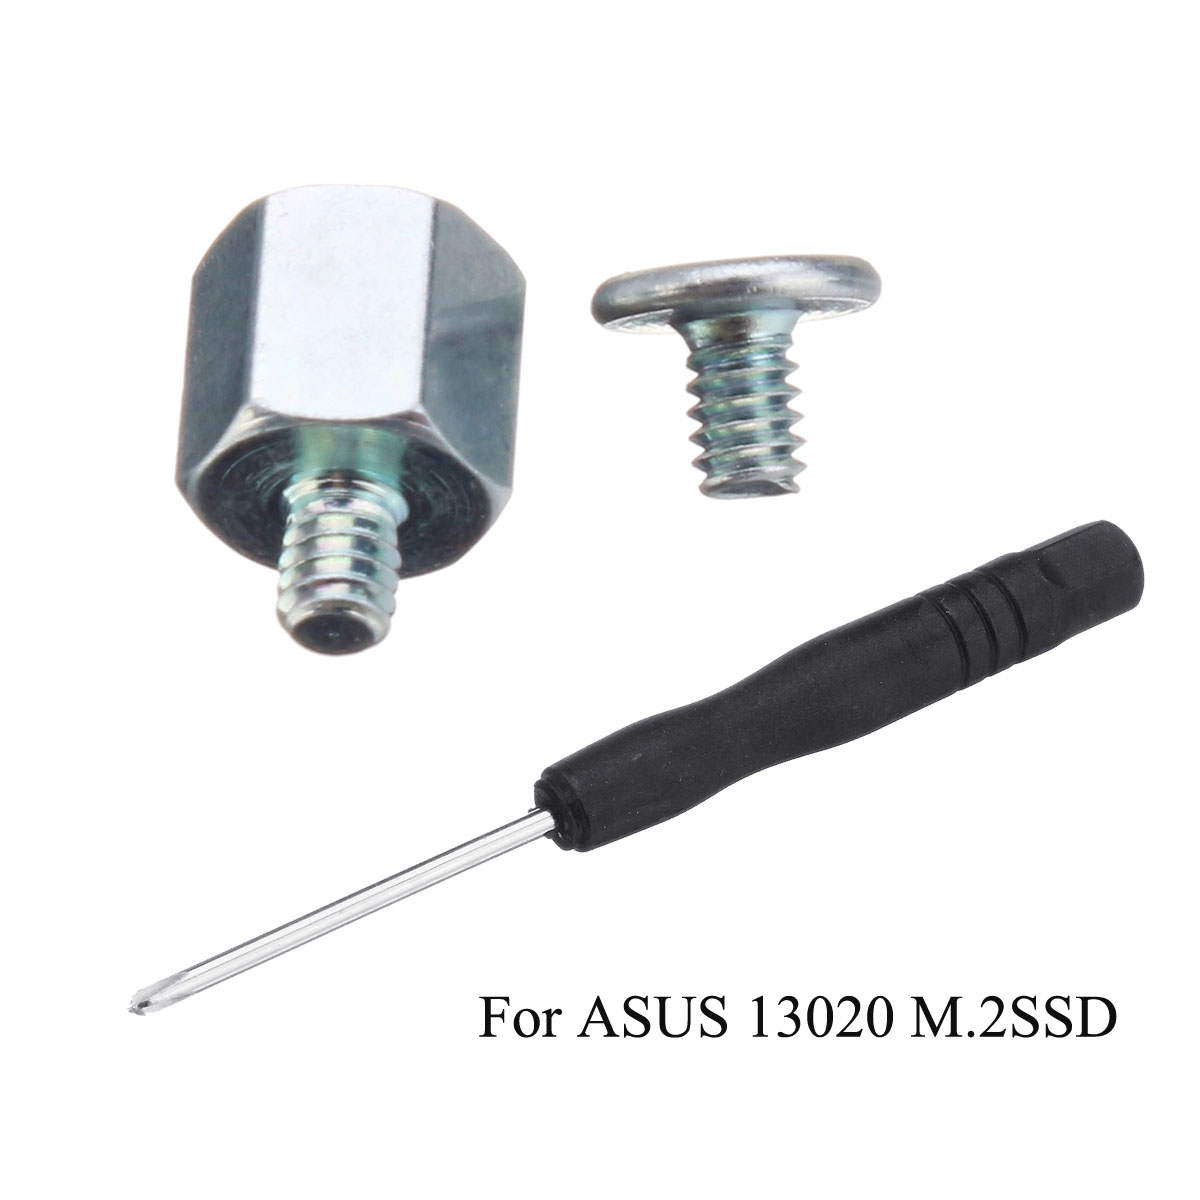 Mounting-Kit-Stand-Off-Screwdriver--Screws-For-ASUS-13020-M2SSD-Motherboard-1470334-1